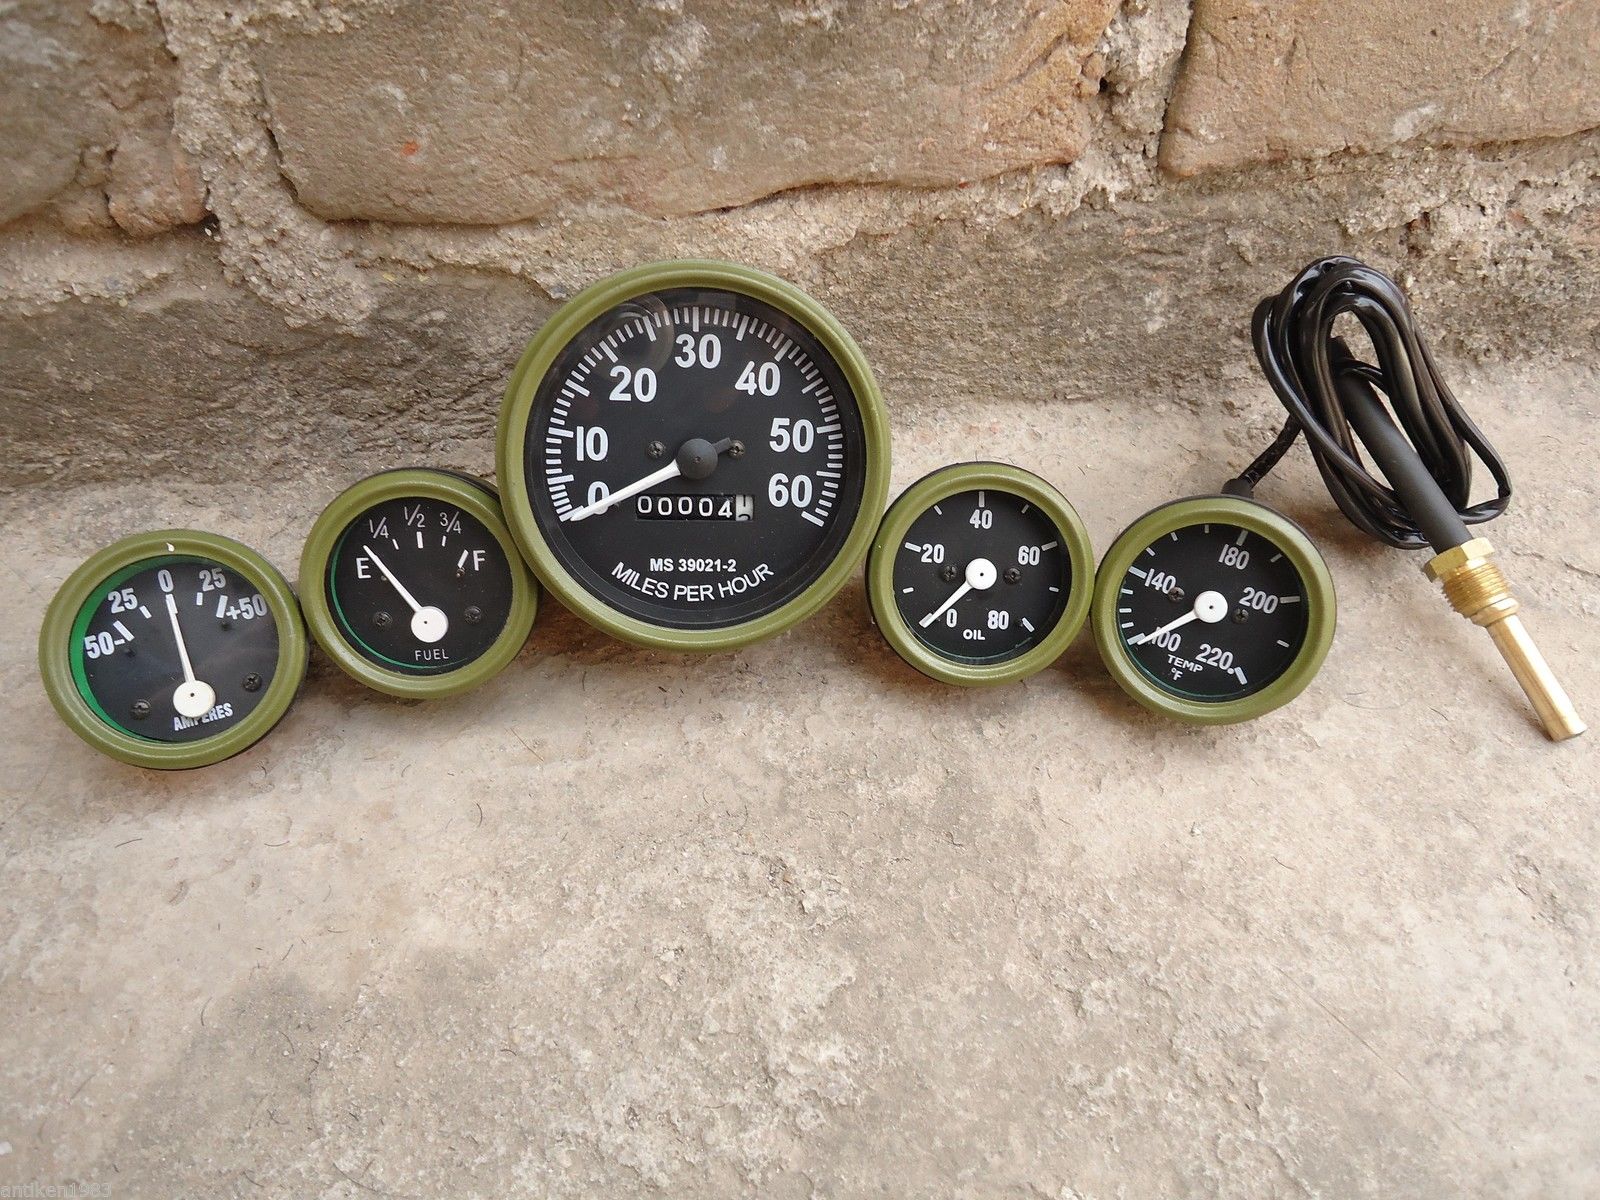 Jeep MB Gauges - Fits MB, GPW, CJ2A, CJ3A And Early CJ3B And Many More Millitary Trucks & Jeeps